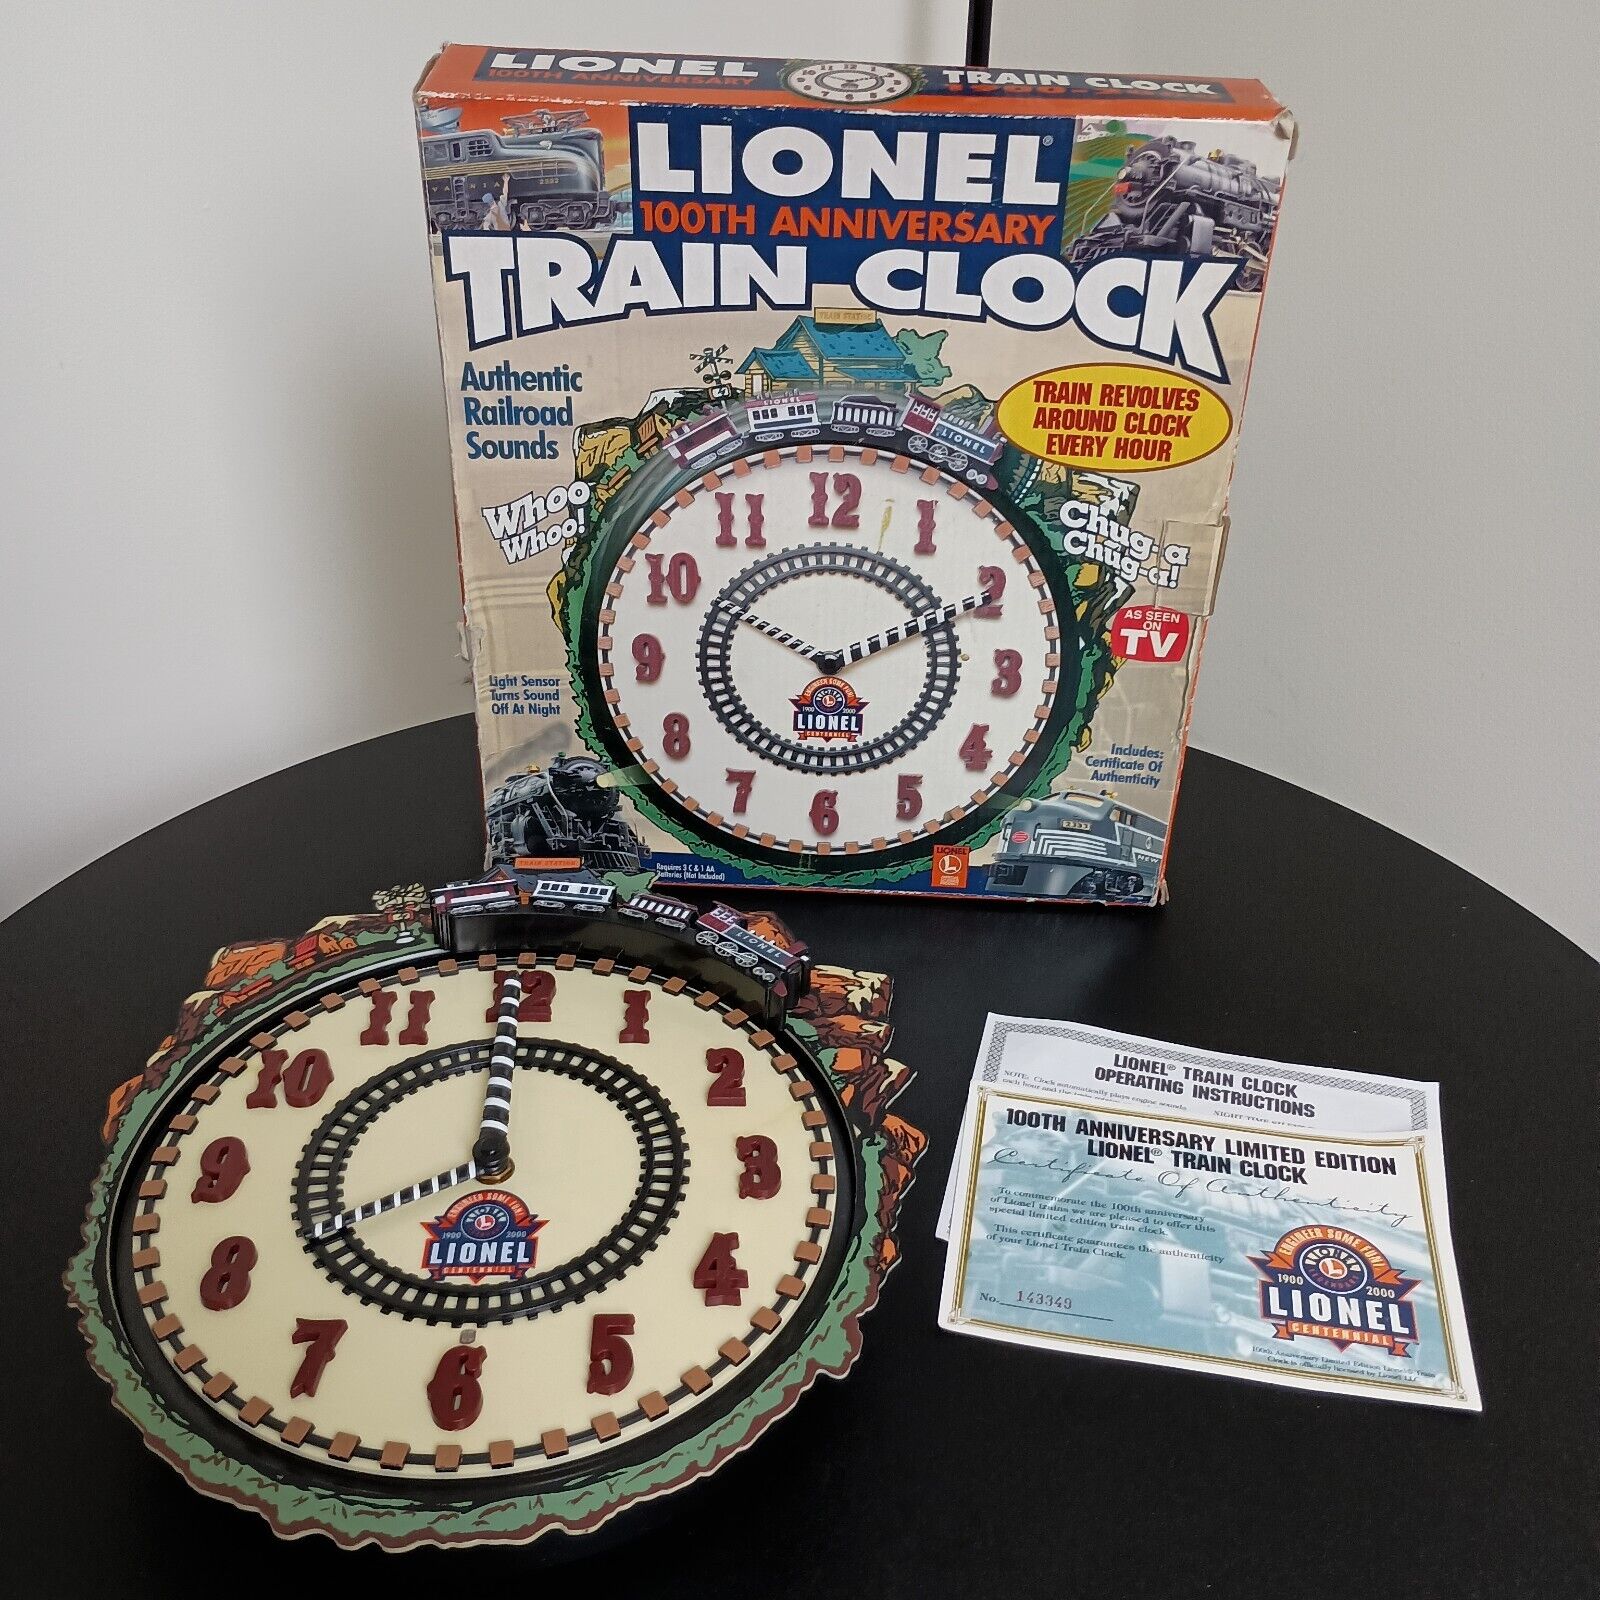 LIONEL 7183 100th Anniversary Train Clock For Repair Does Not Work Correctly